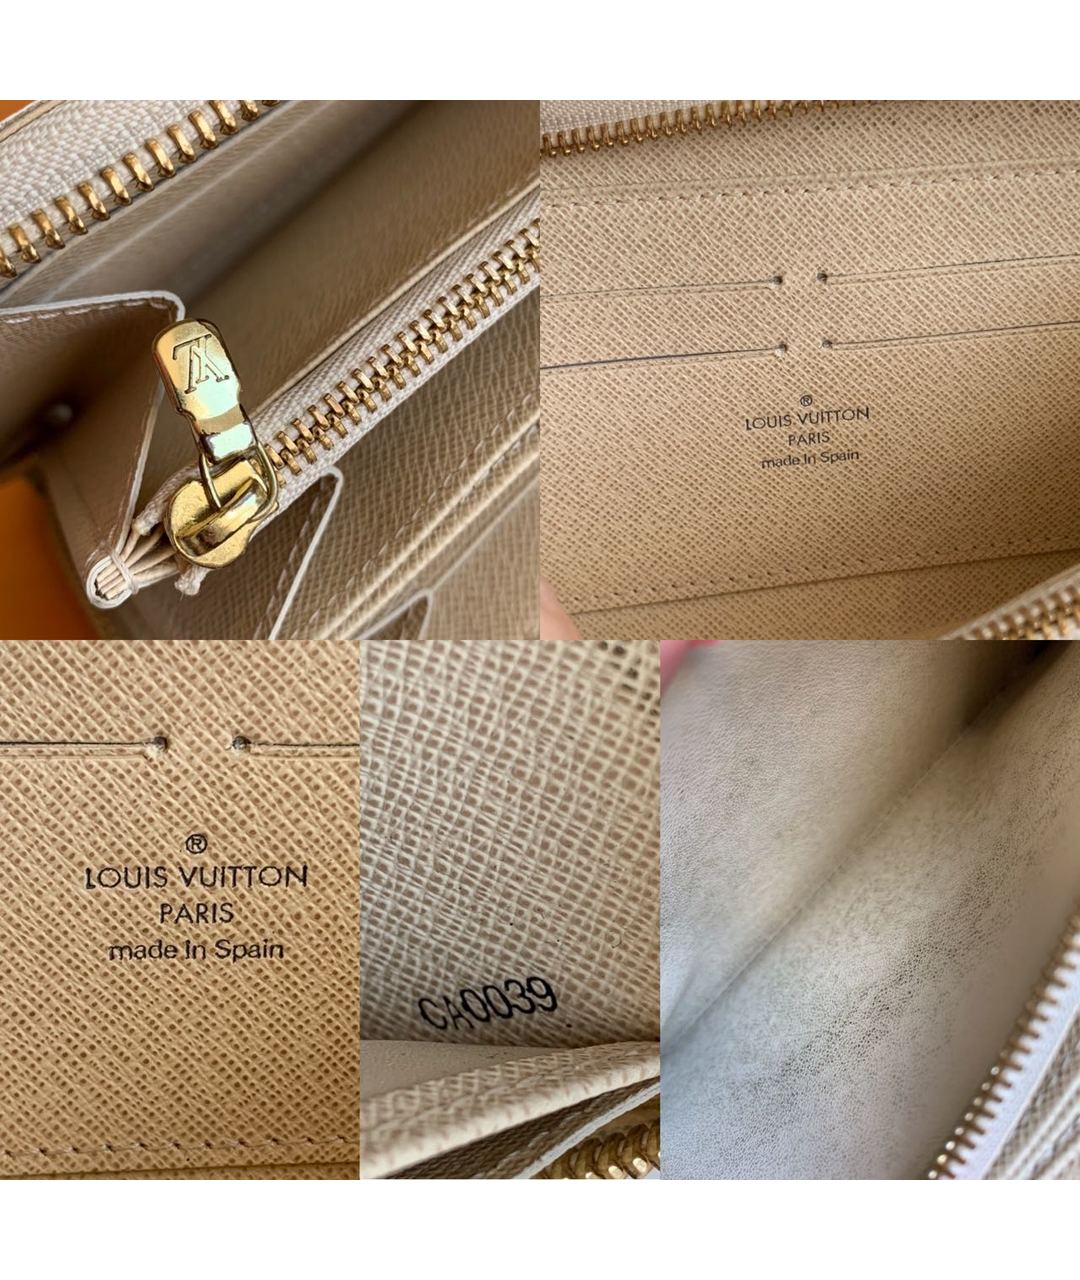 LOUIS VUITTON PRE-OWNED Белый кошелек, фото 7